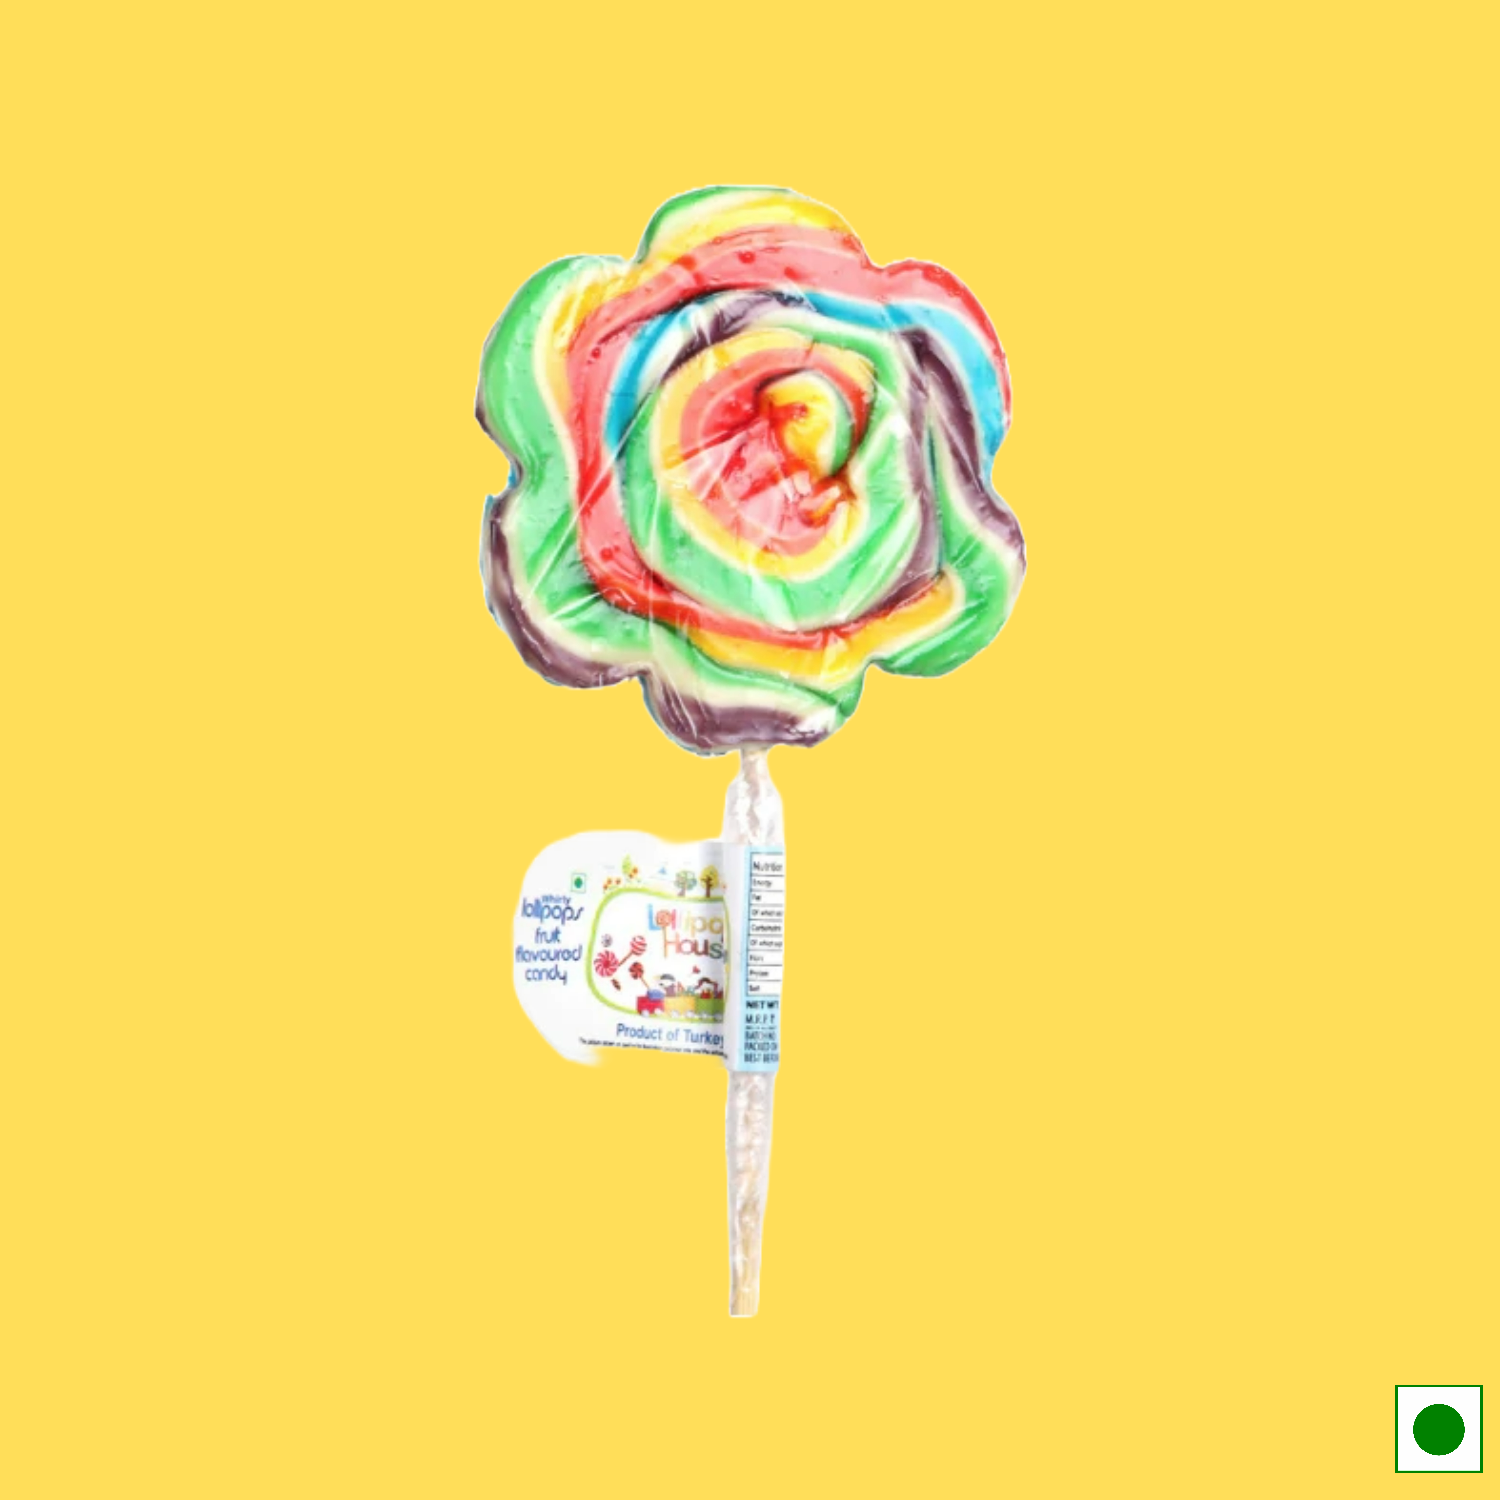 Candyfox Multicolored Lollipop, 30g-1pc (Imported)